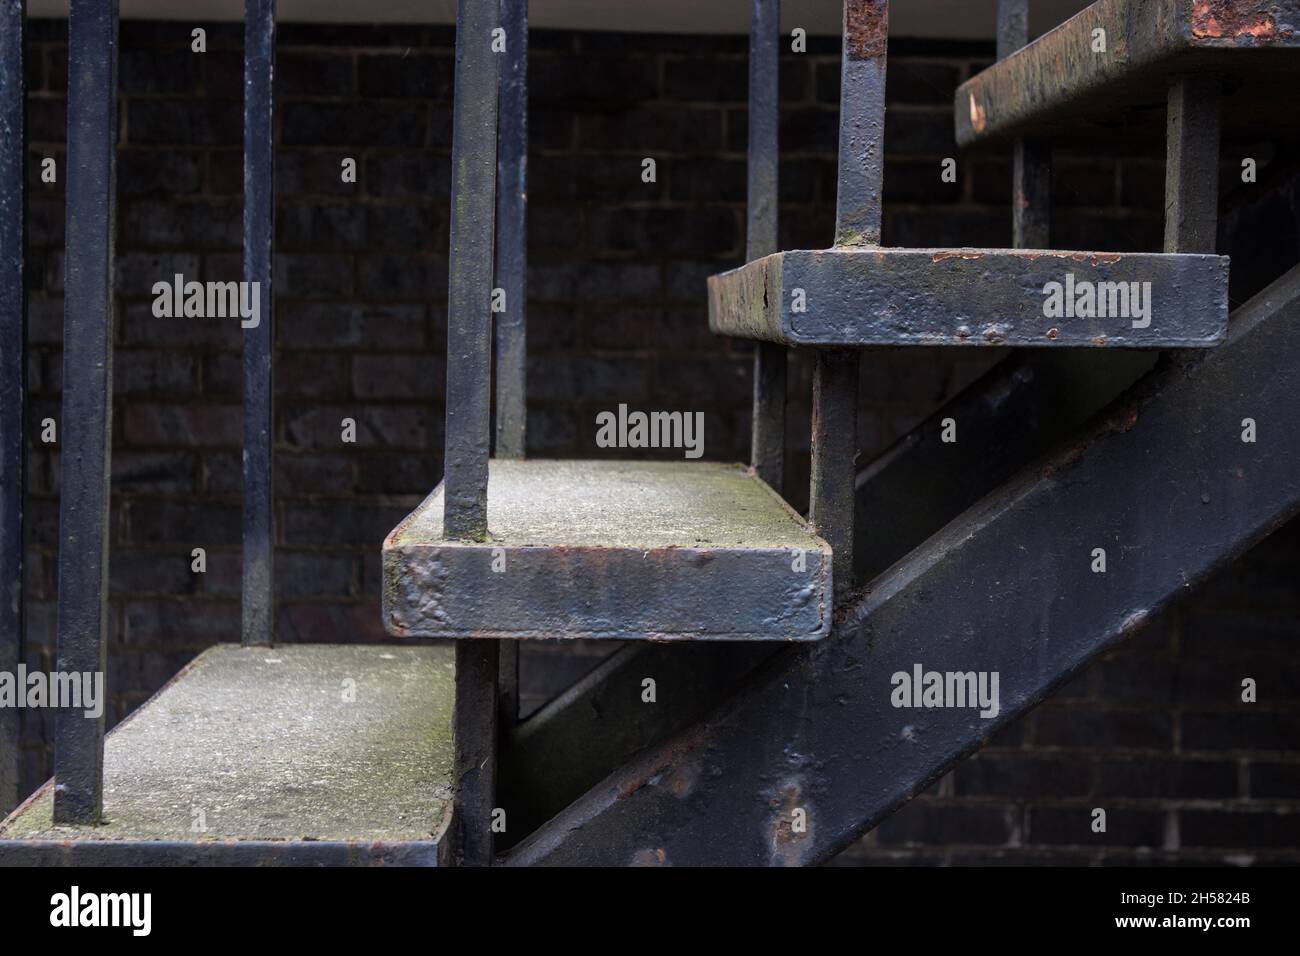 Outdoor Staircase, Steps, Stairs, Rusting Metal, Brick Wall in Background Stock Photo